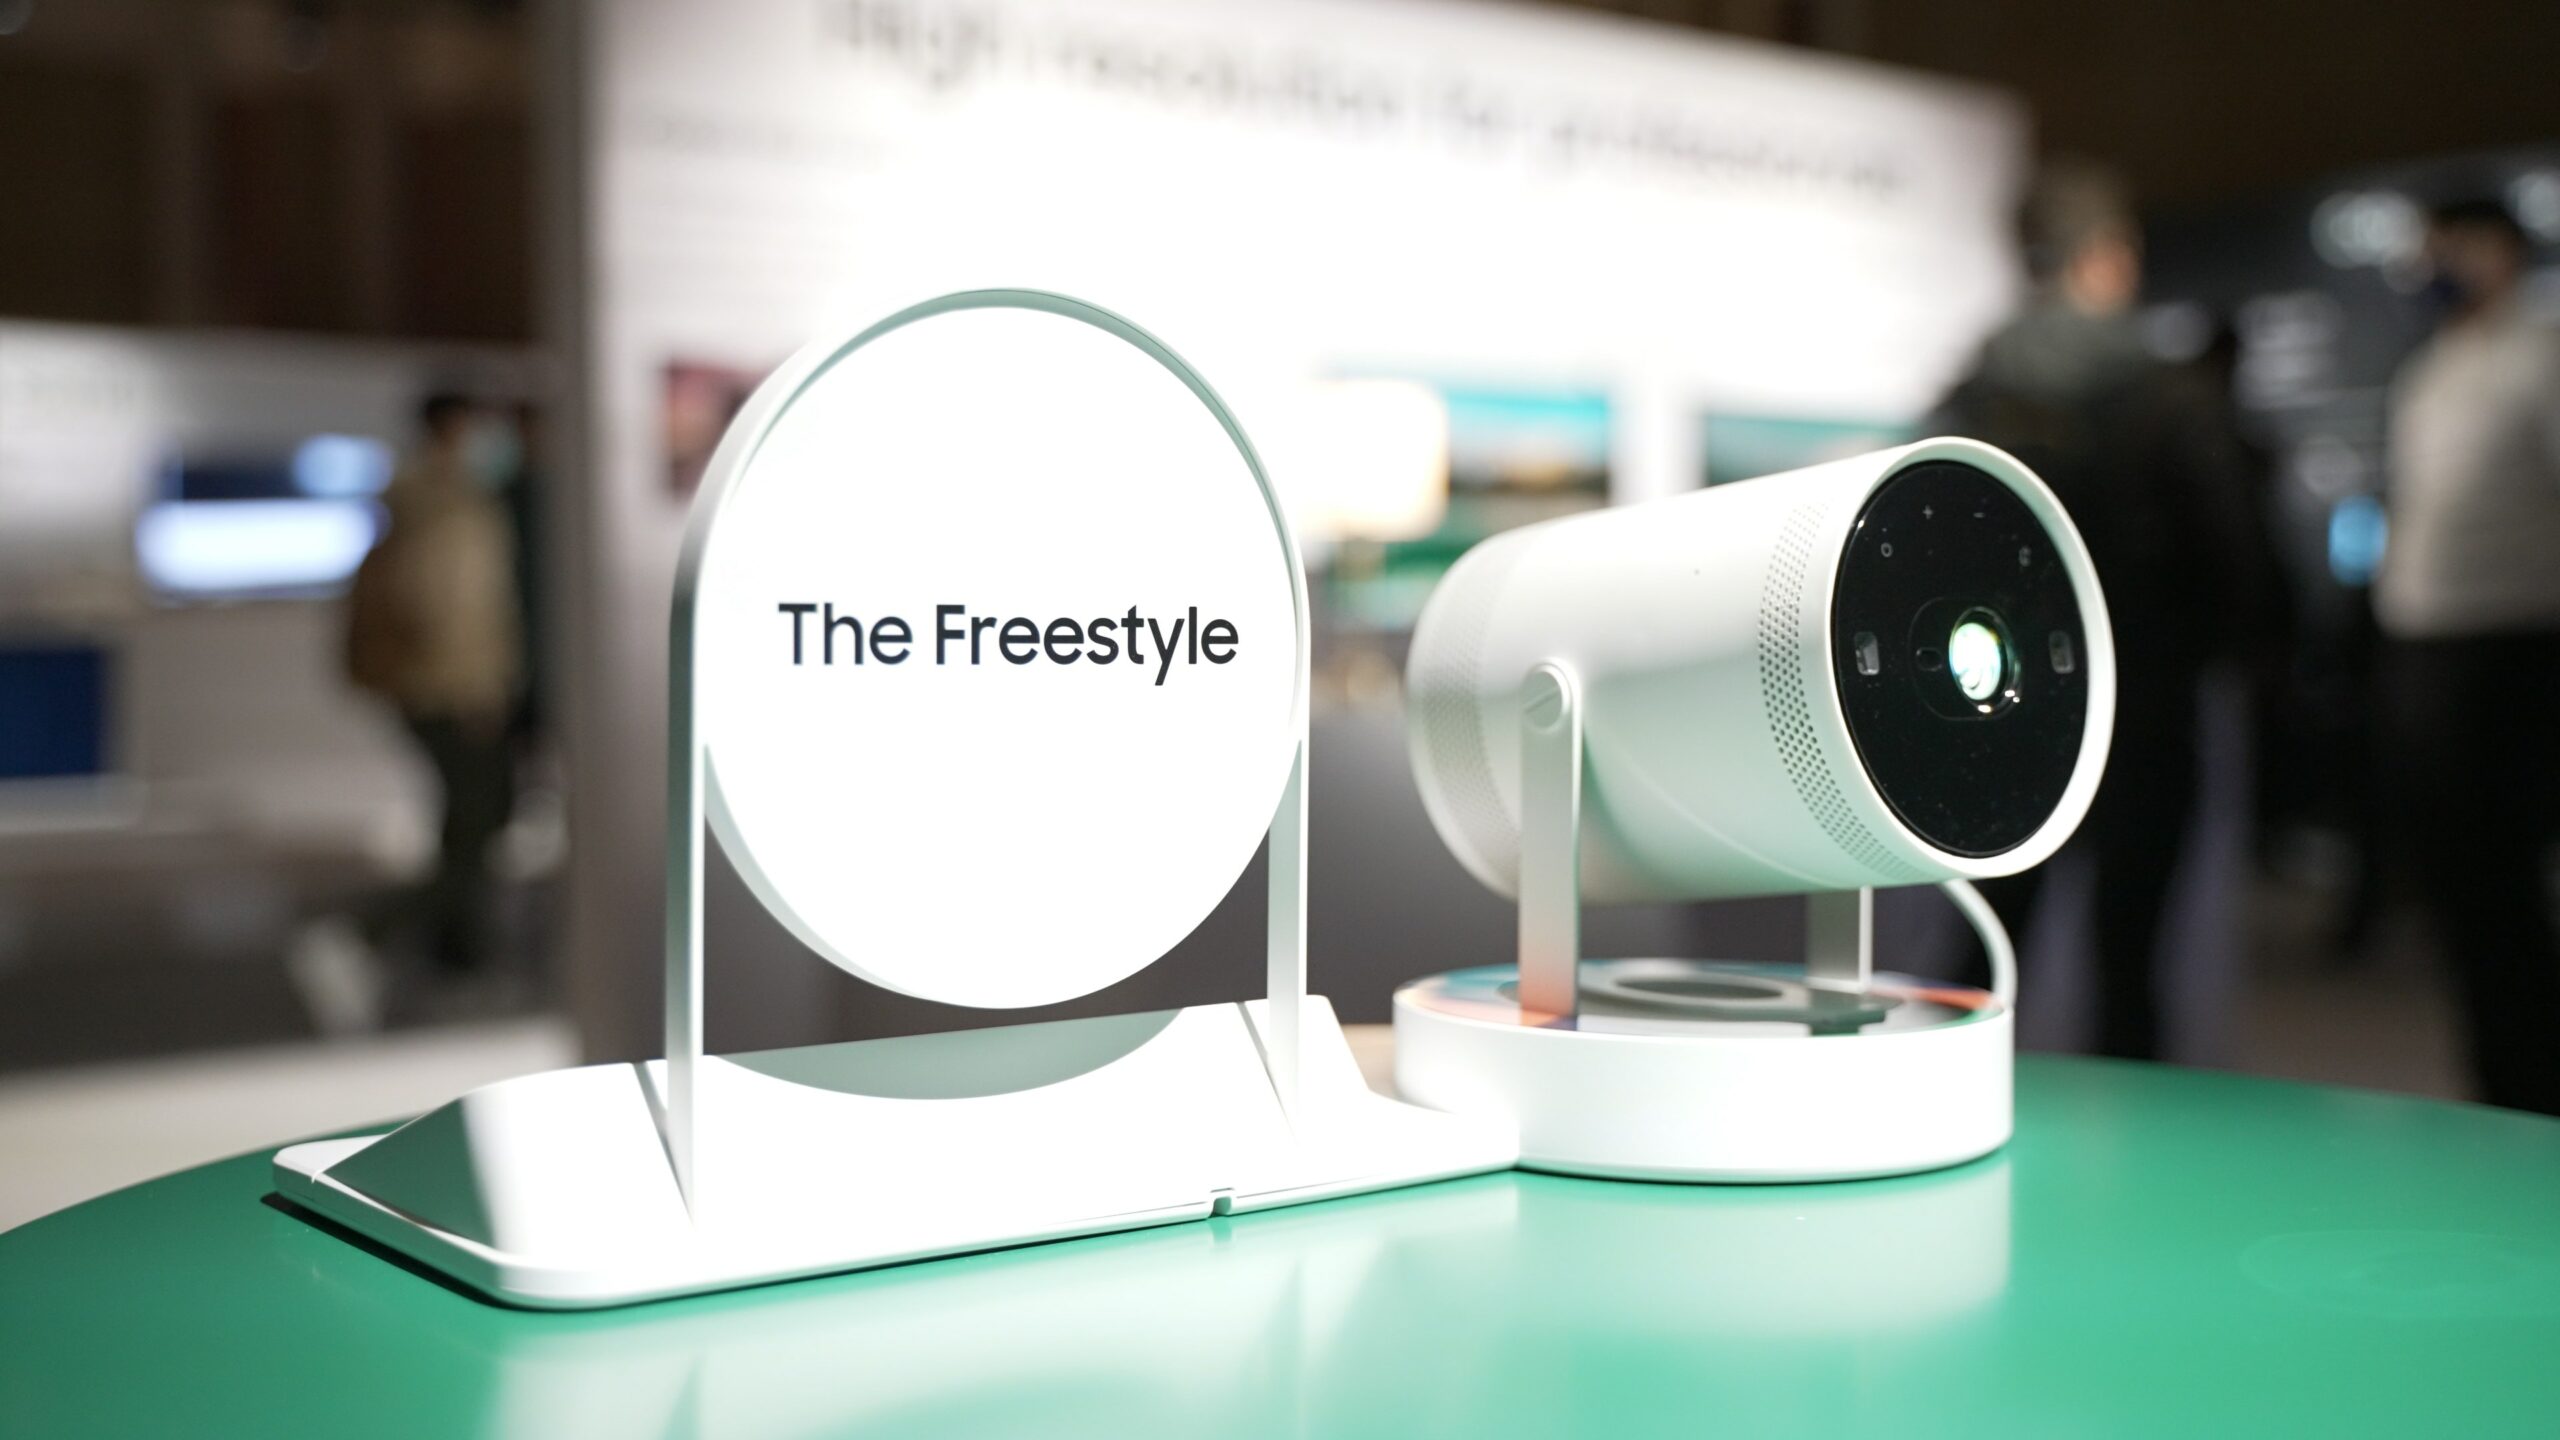 The Freestyle 2nd Gen pre-order bundle offers incredible value - SamMobile